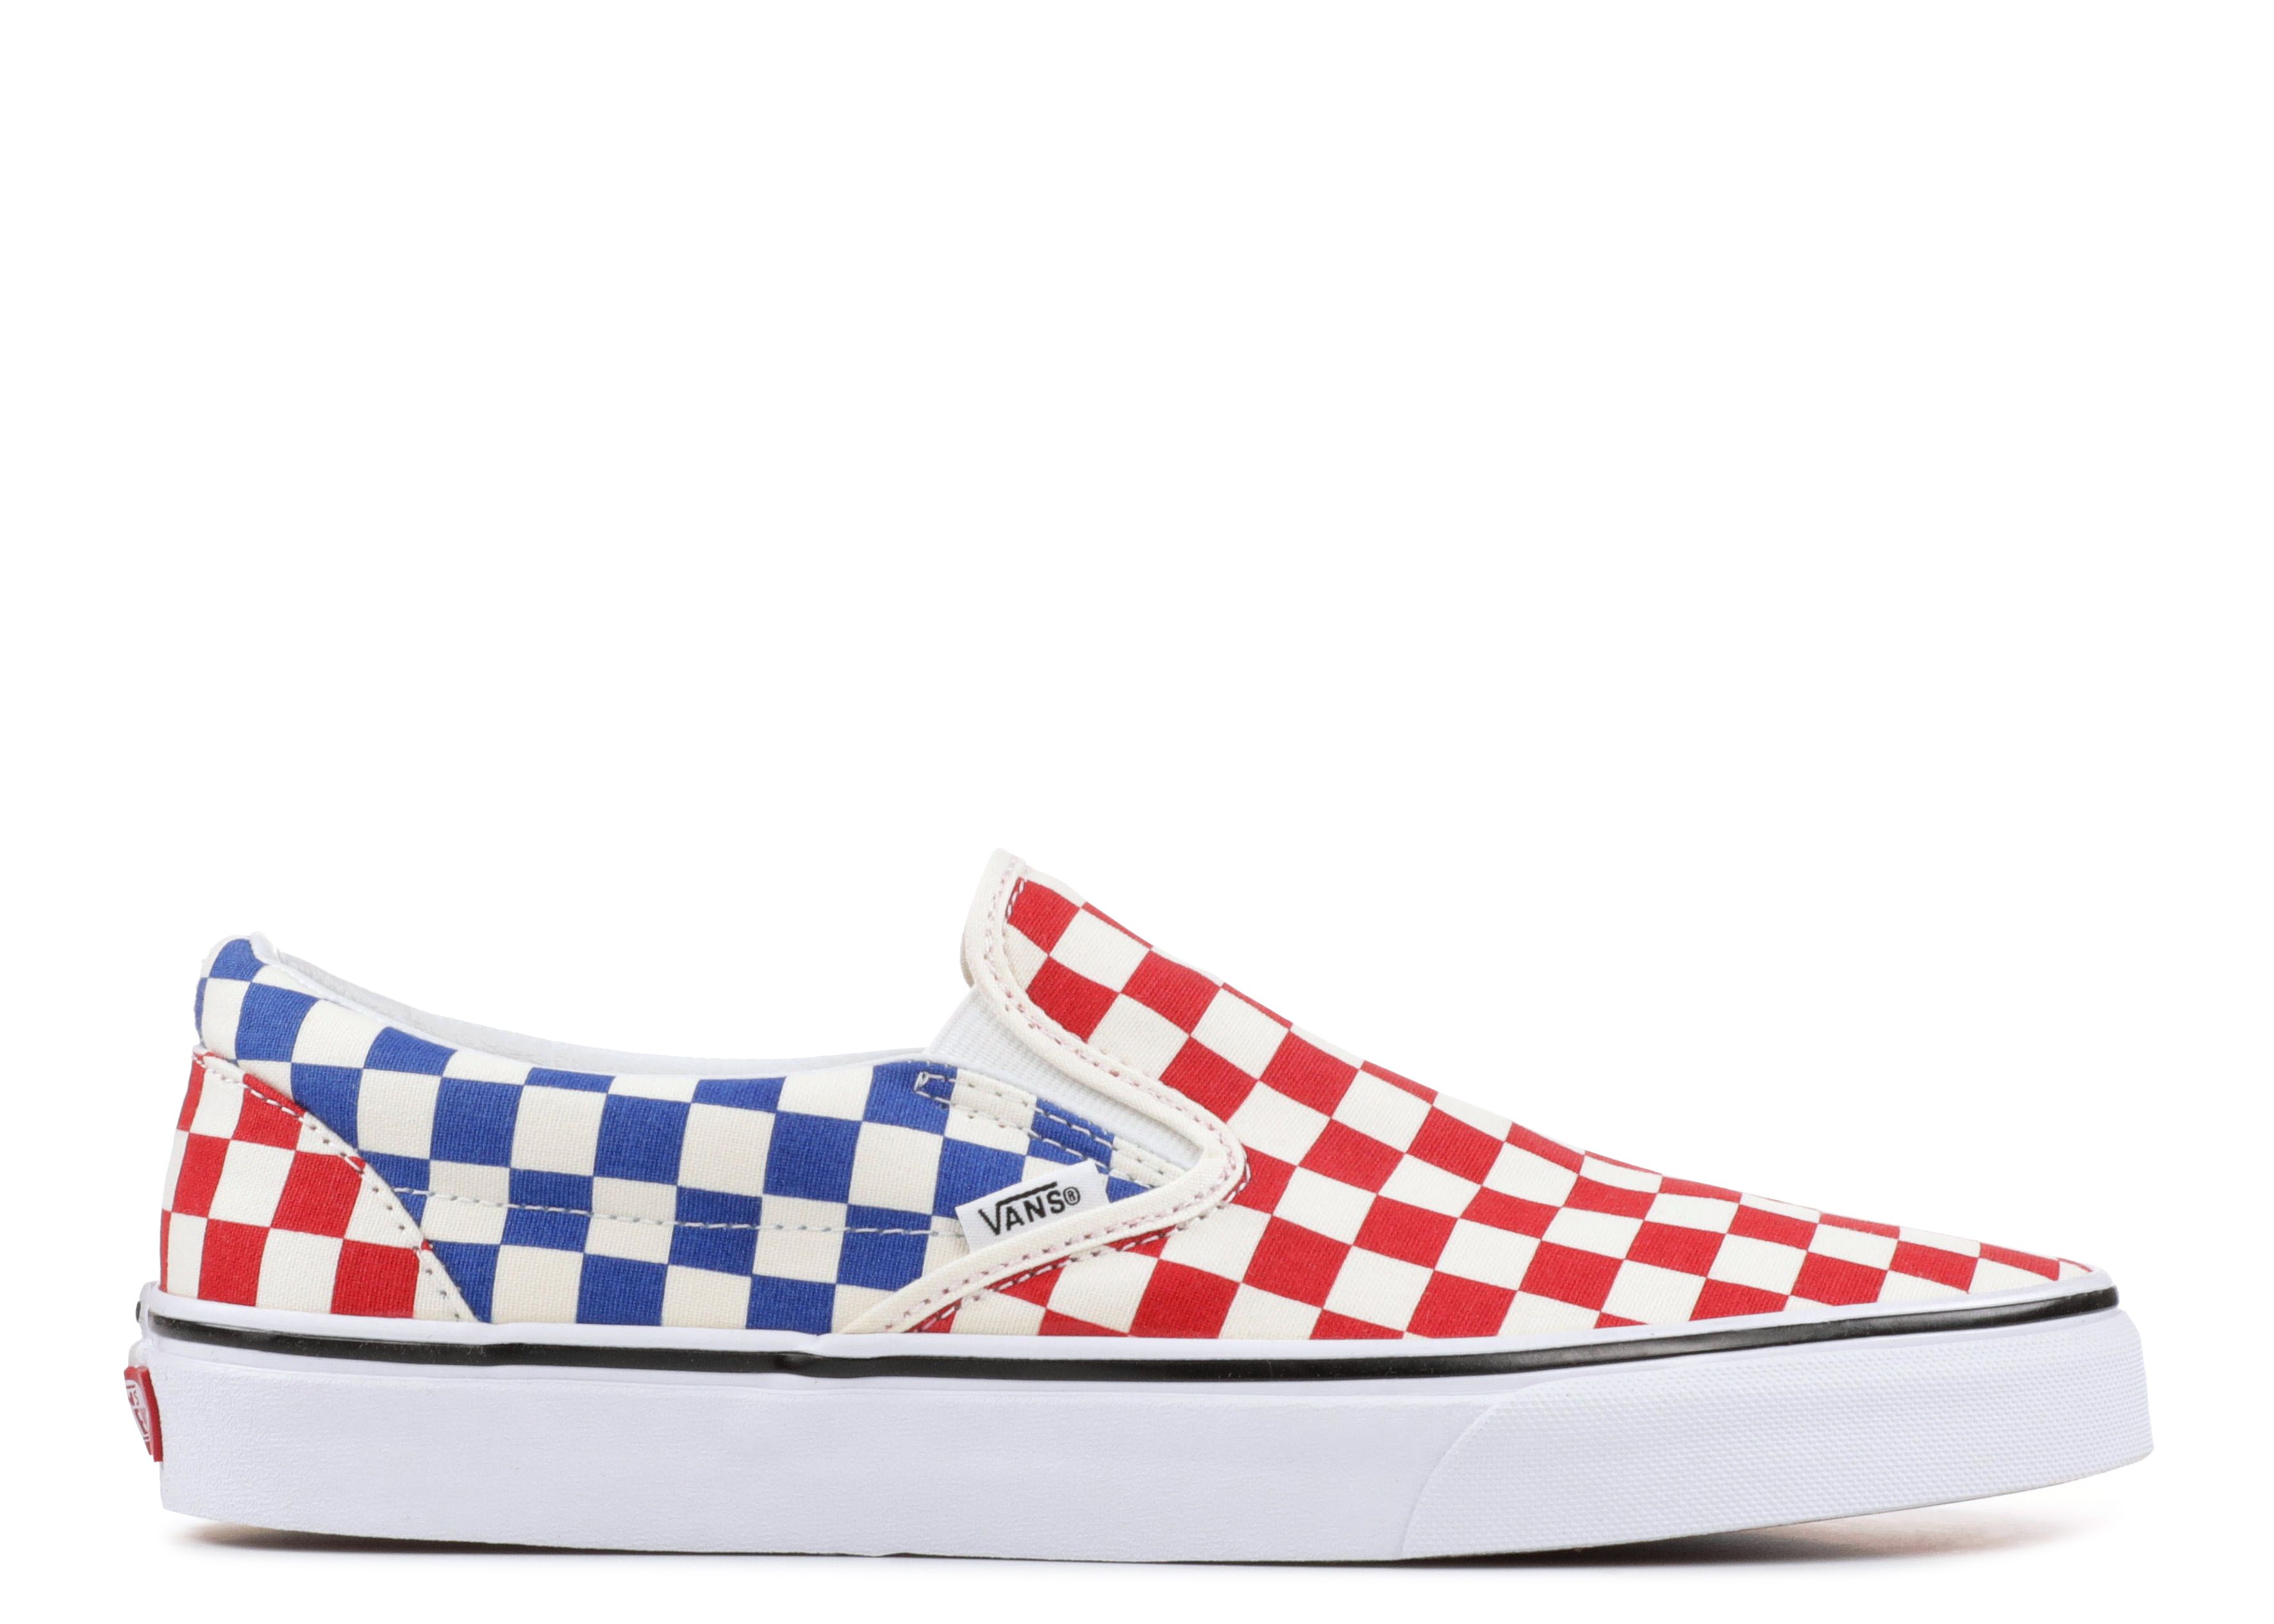 Classic Slip On Checkerboard Vans Vn0a38f7qcs Red Blue